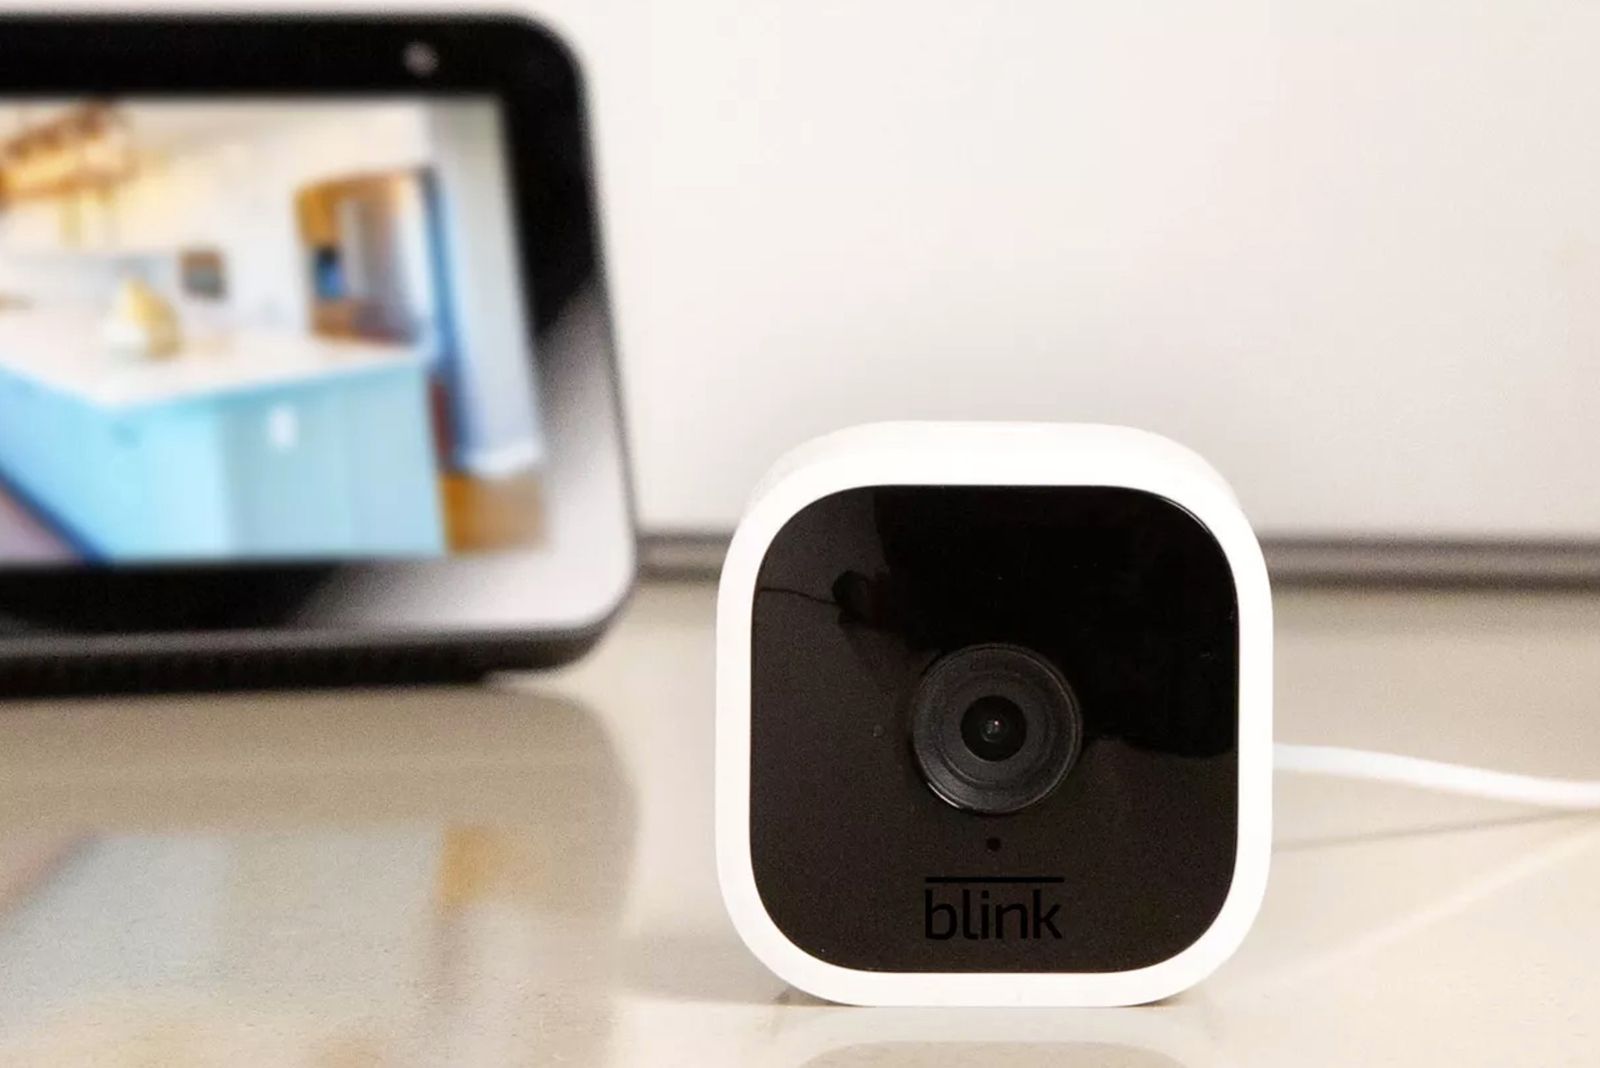 Get $10/£10 off the Blink Mini compact indoor security cam - now $25/£25 photo 1